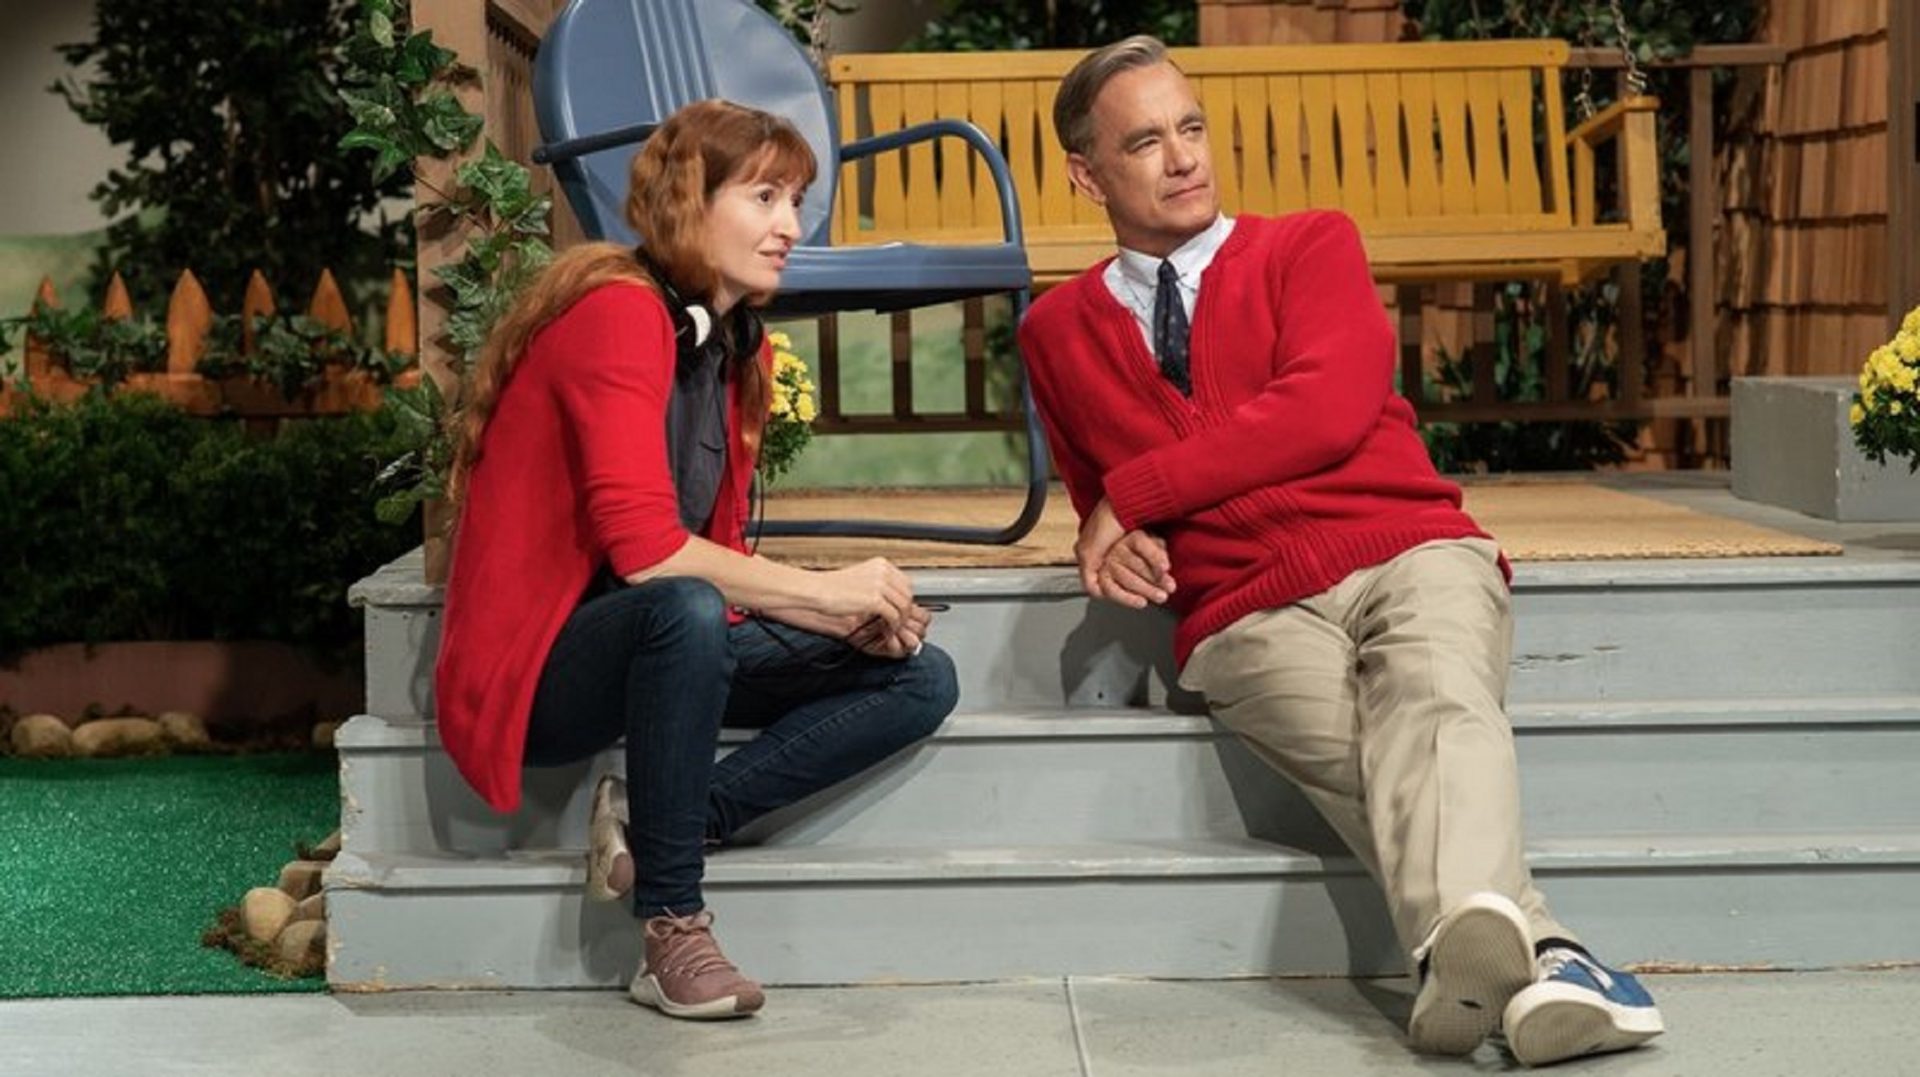 "The way the public feels about Tom Hanks has a similar quality to how we feel about Mister Rogers," says director Marielle Heller. But she found that Hanks and Rogers had a very different energy. At the beginning, she tried to "rein Tom's natural buoyancy back and settle him into a kind of zenlike state."